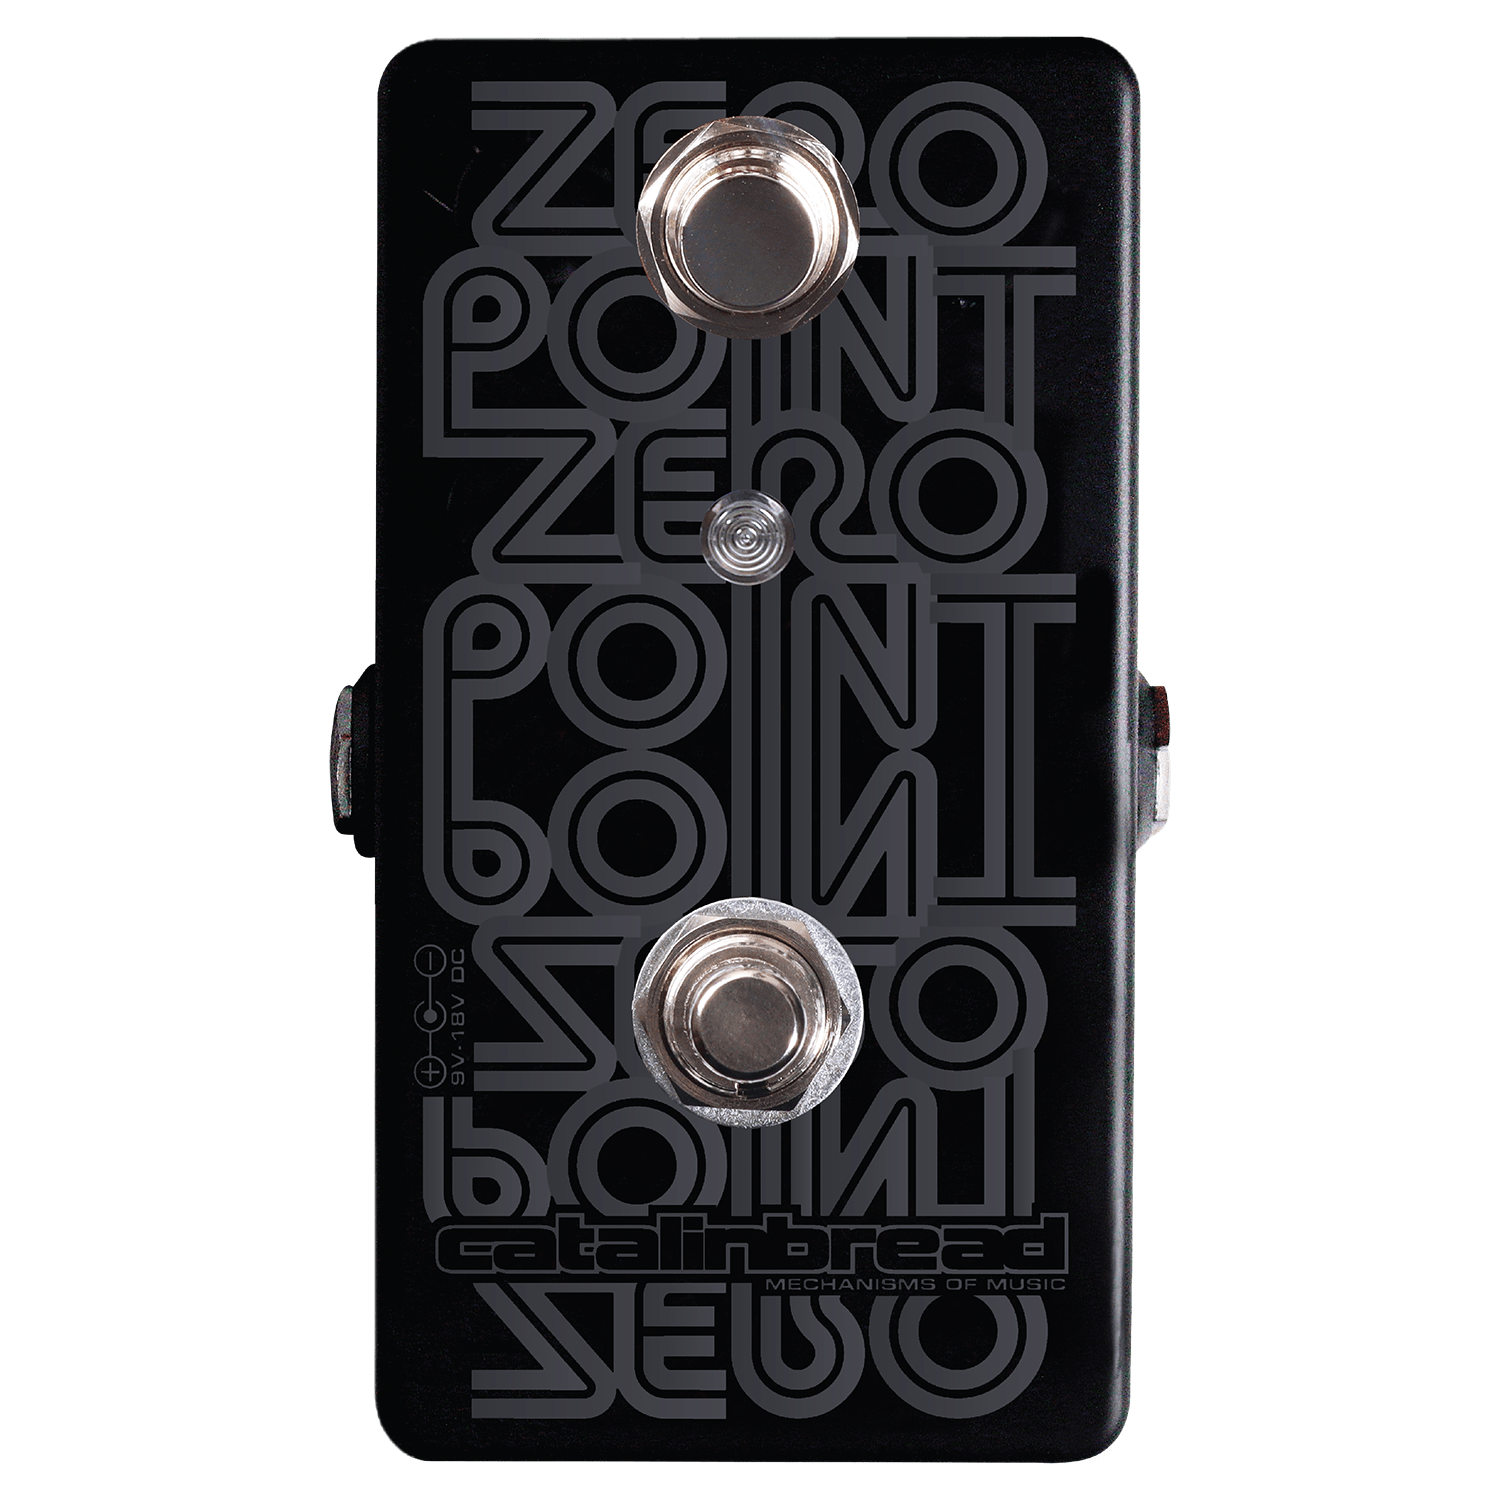 Zero Point Flanger (Limited Edition)